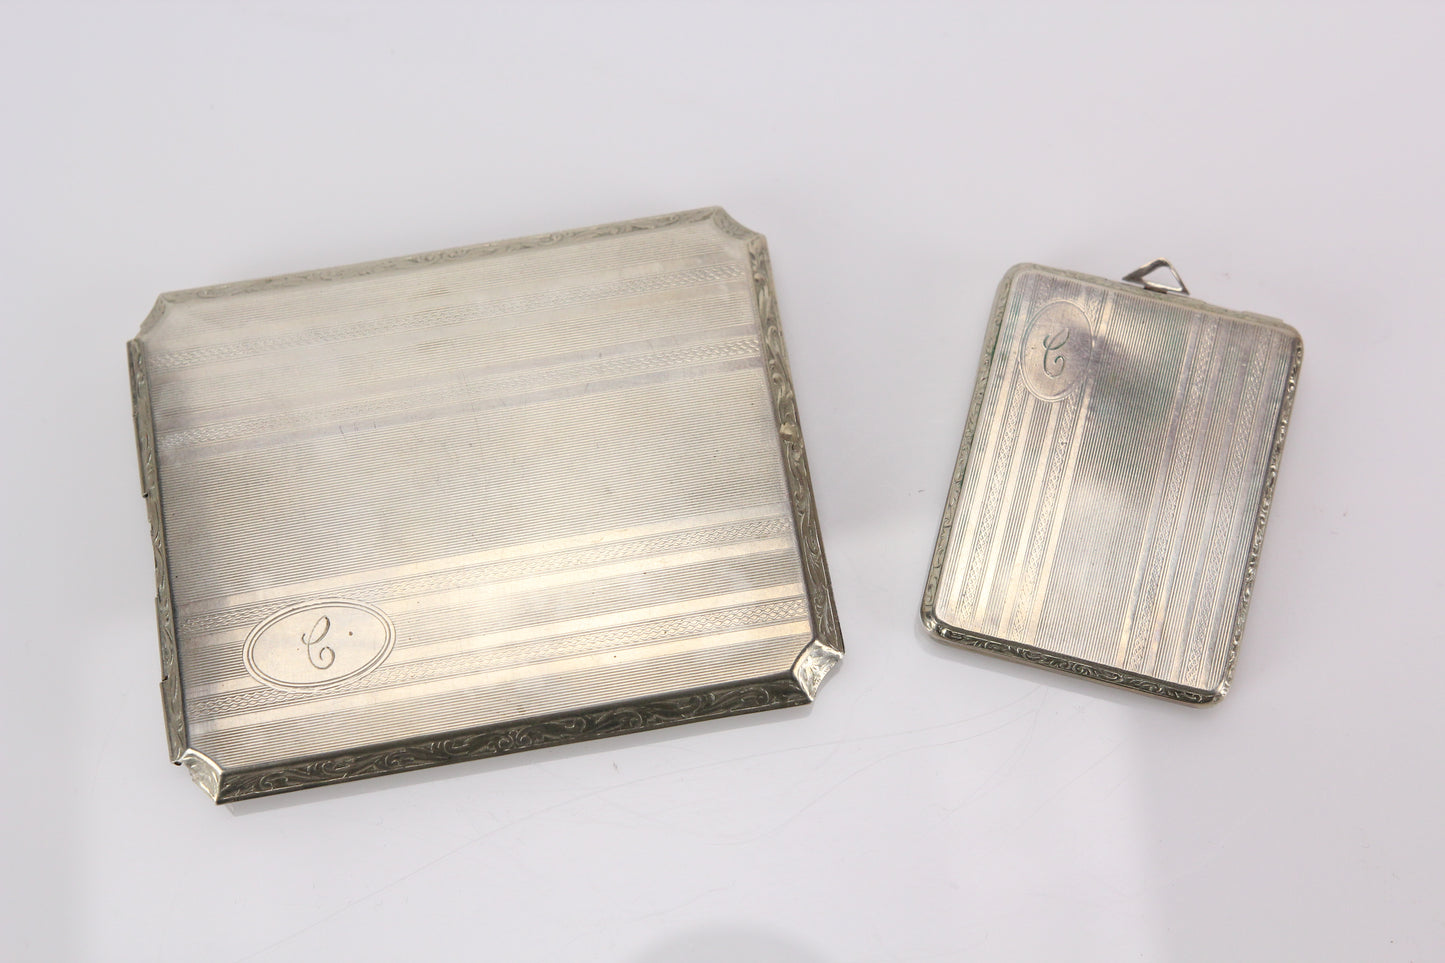 Matching Monogrammed "C" Cigarette Case and Compact by M.S.P. Co.